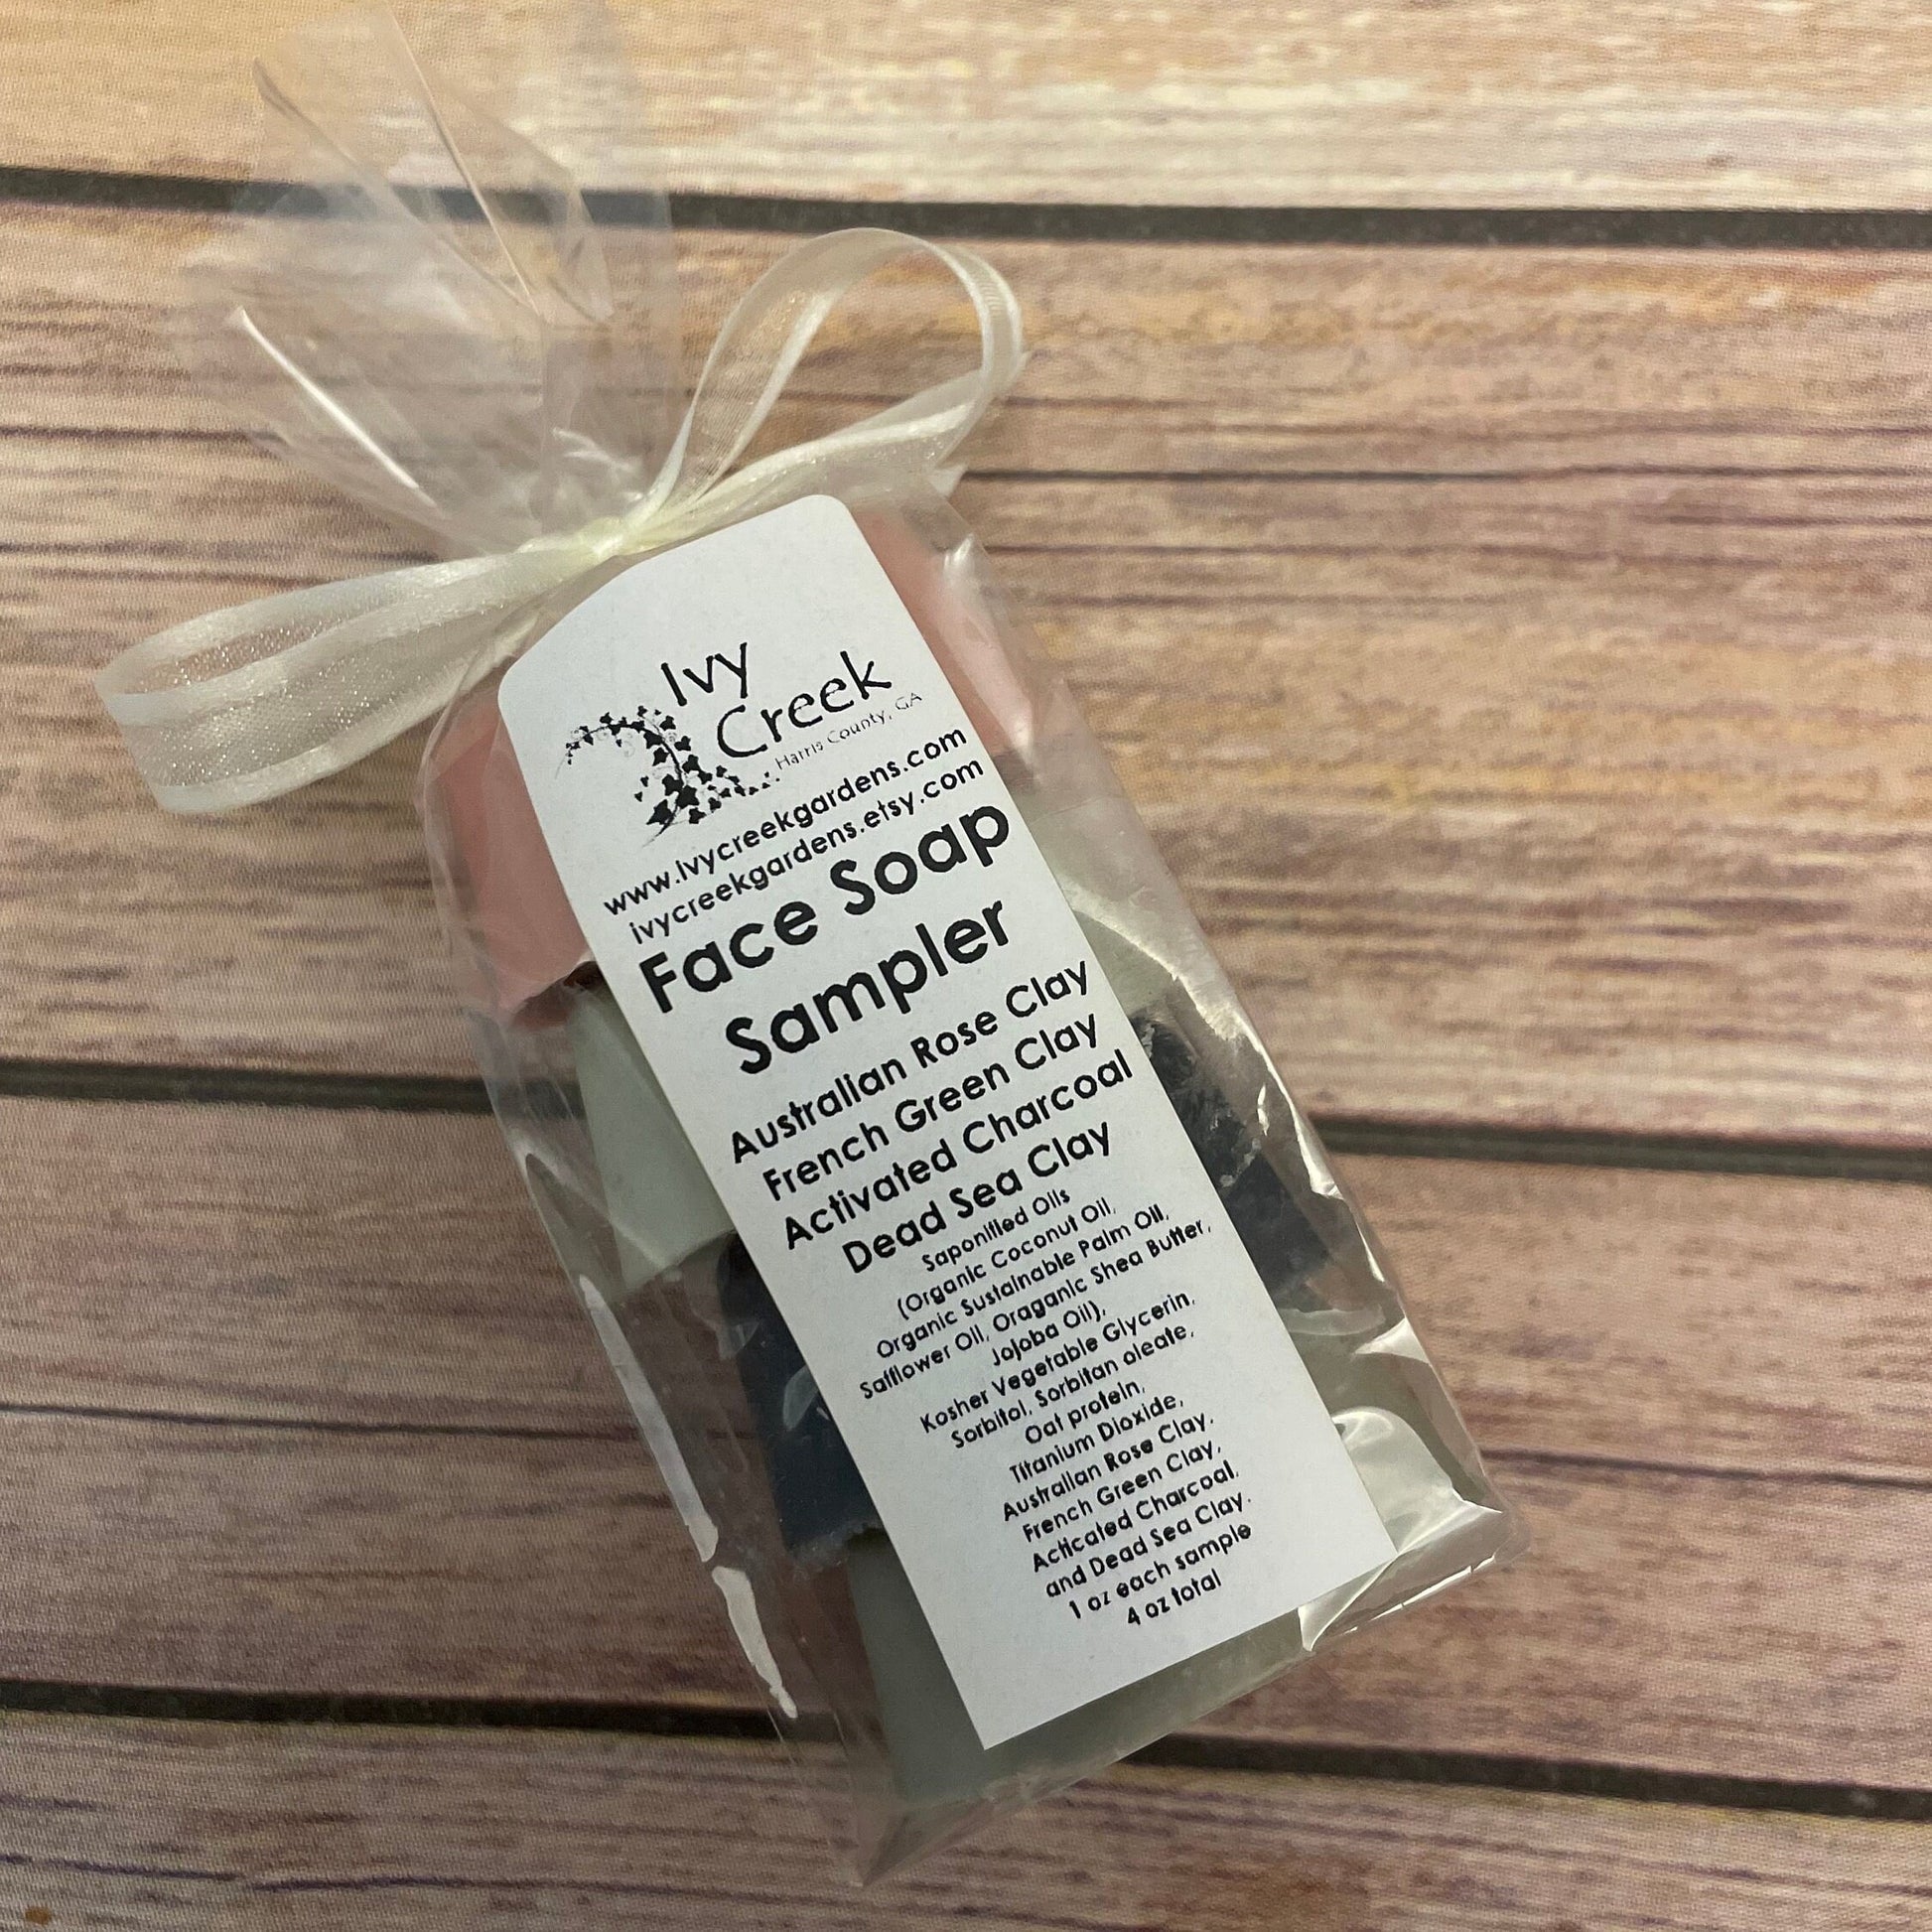 Ivy Creek Clay Face Soap Sampler Set | Australian Rose Clay, French Green Clay, Activated Charcoal, Dead Sea Clay - 4 oz